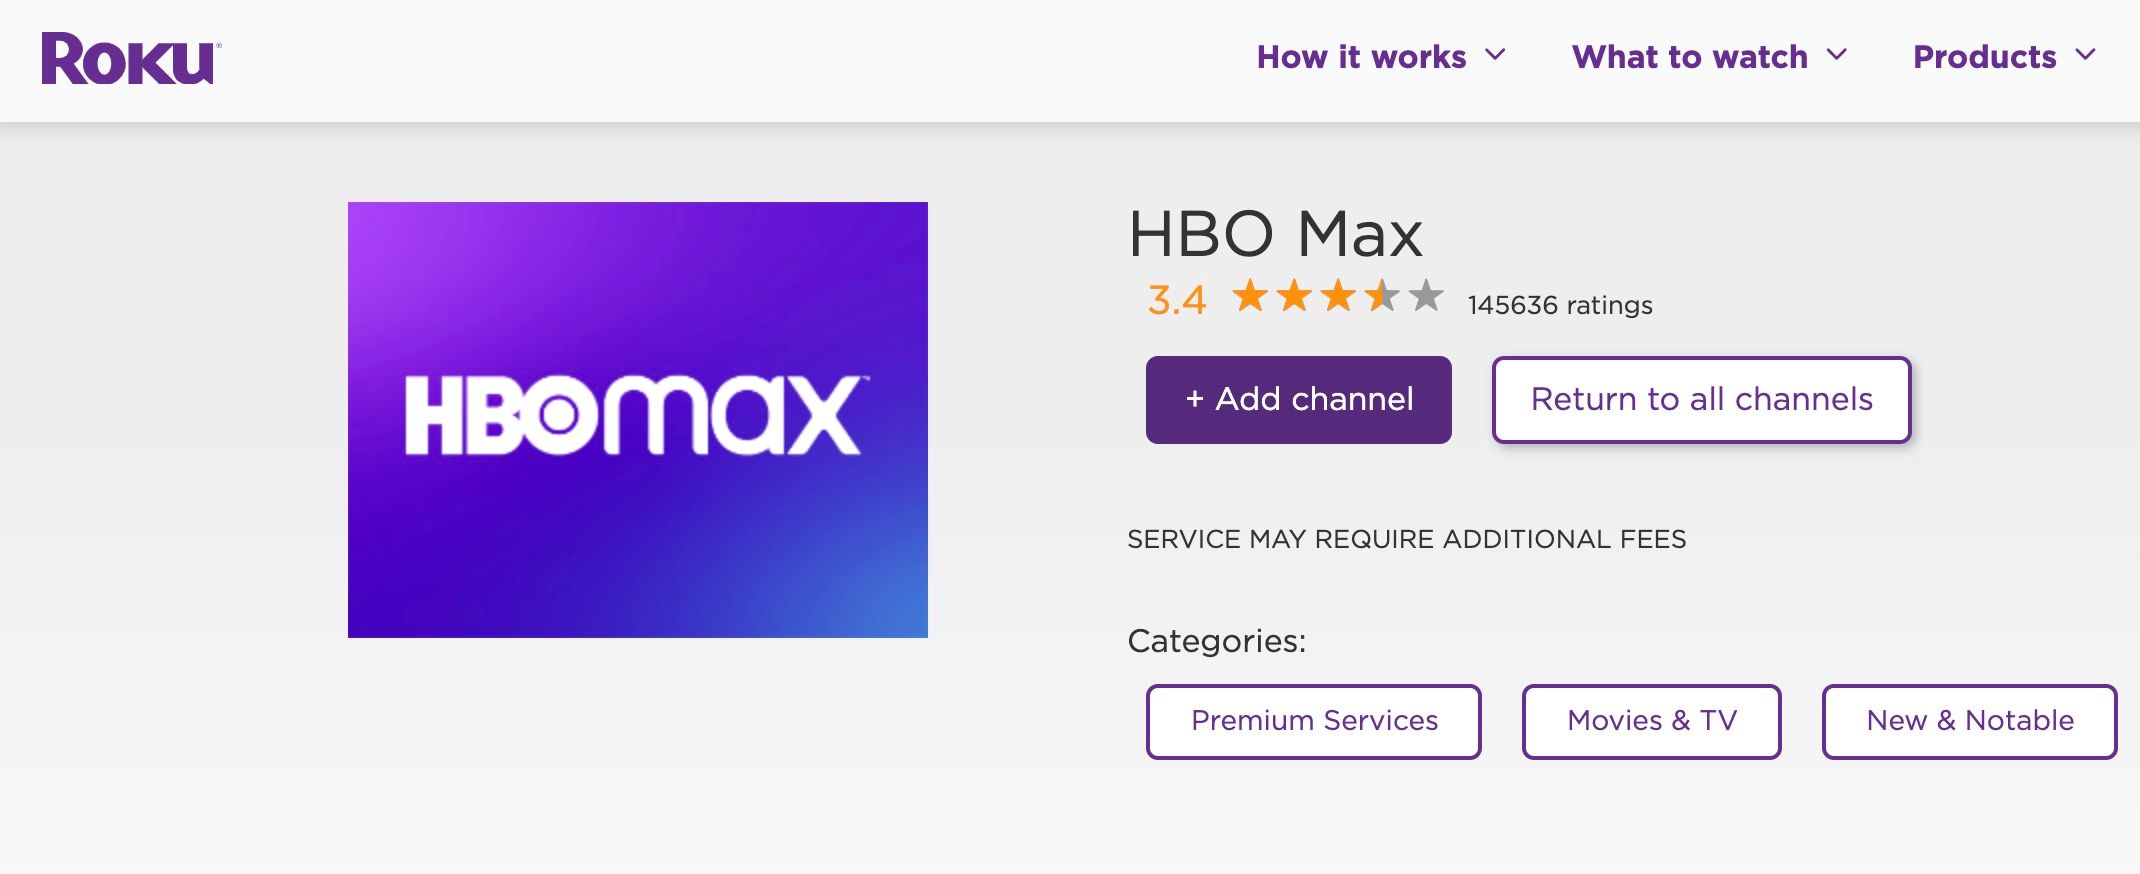 HBO Max app for Roku devices